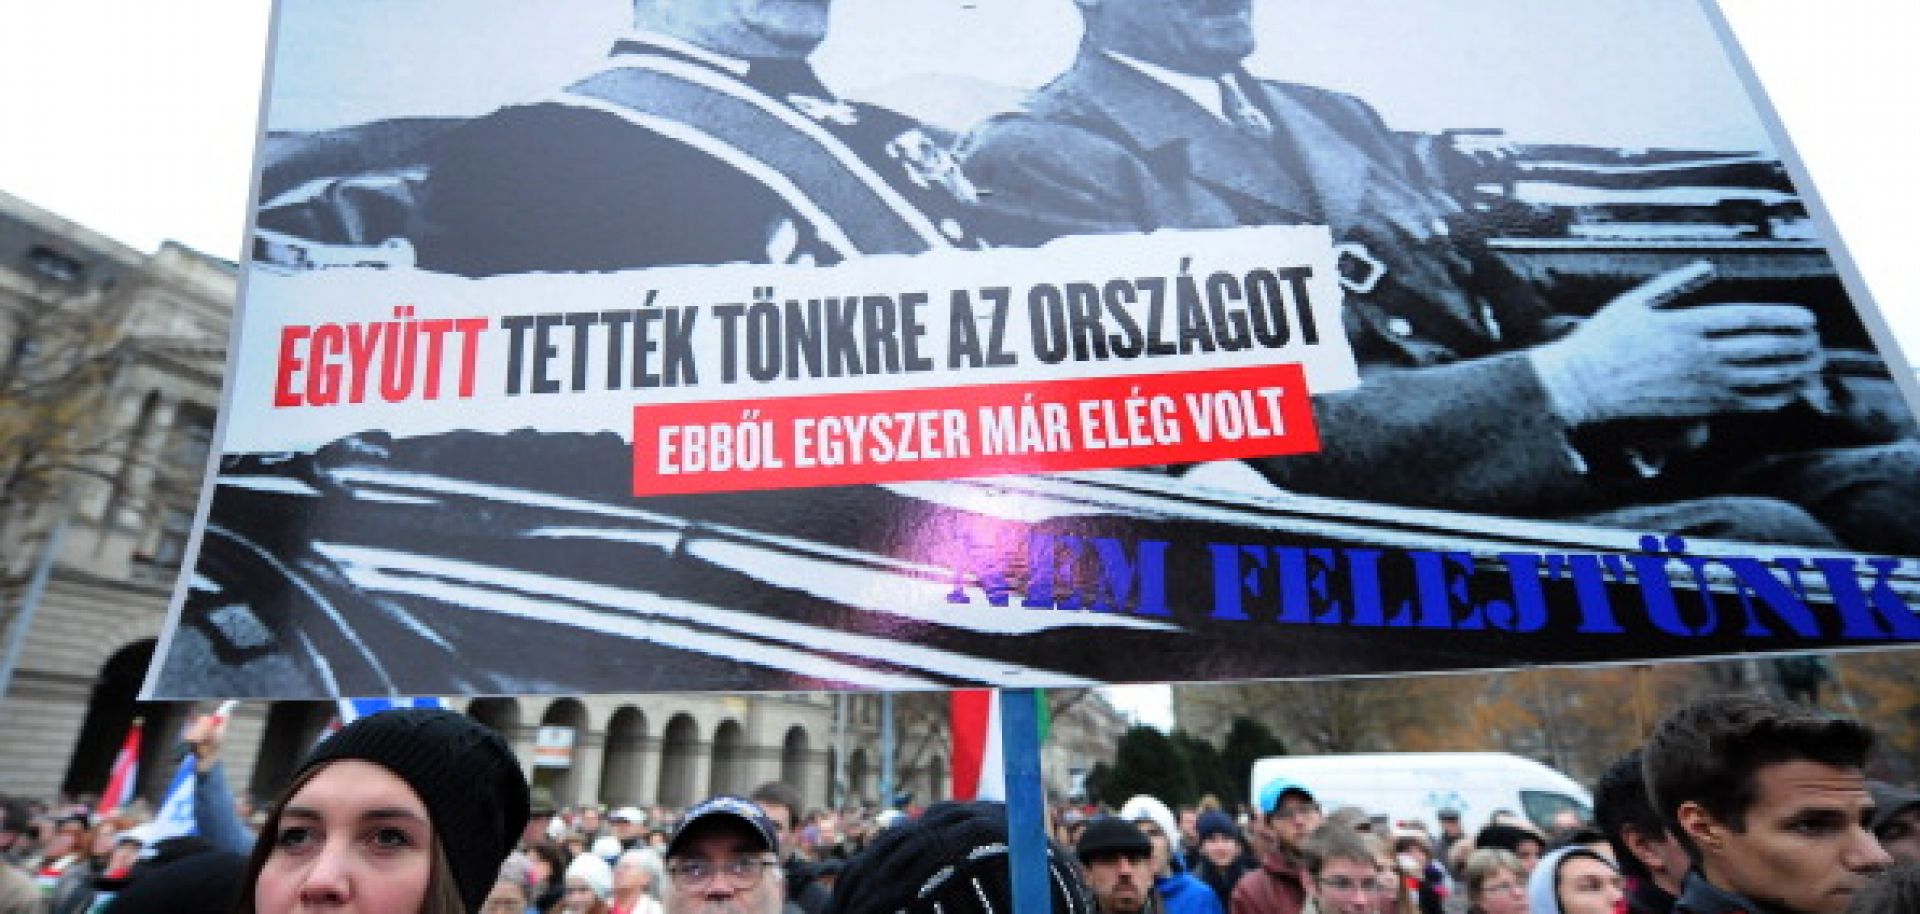 Far-Right Nationalism in Hungary